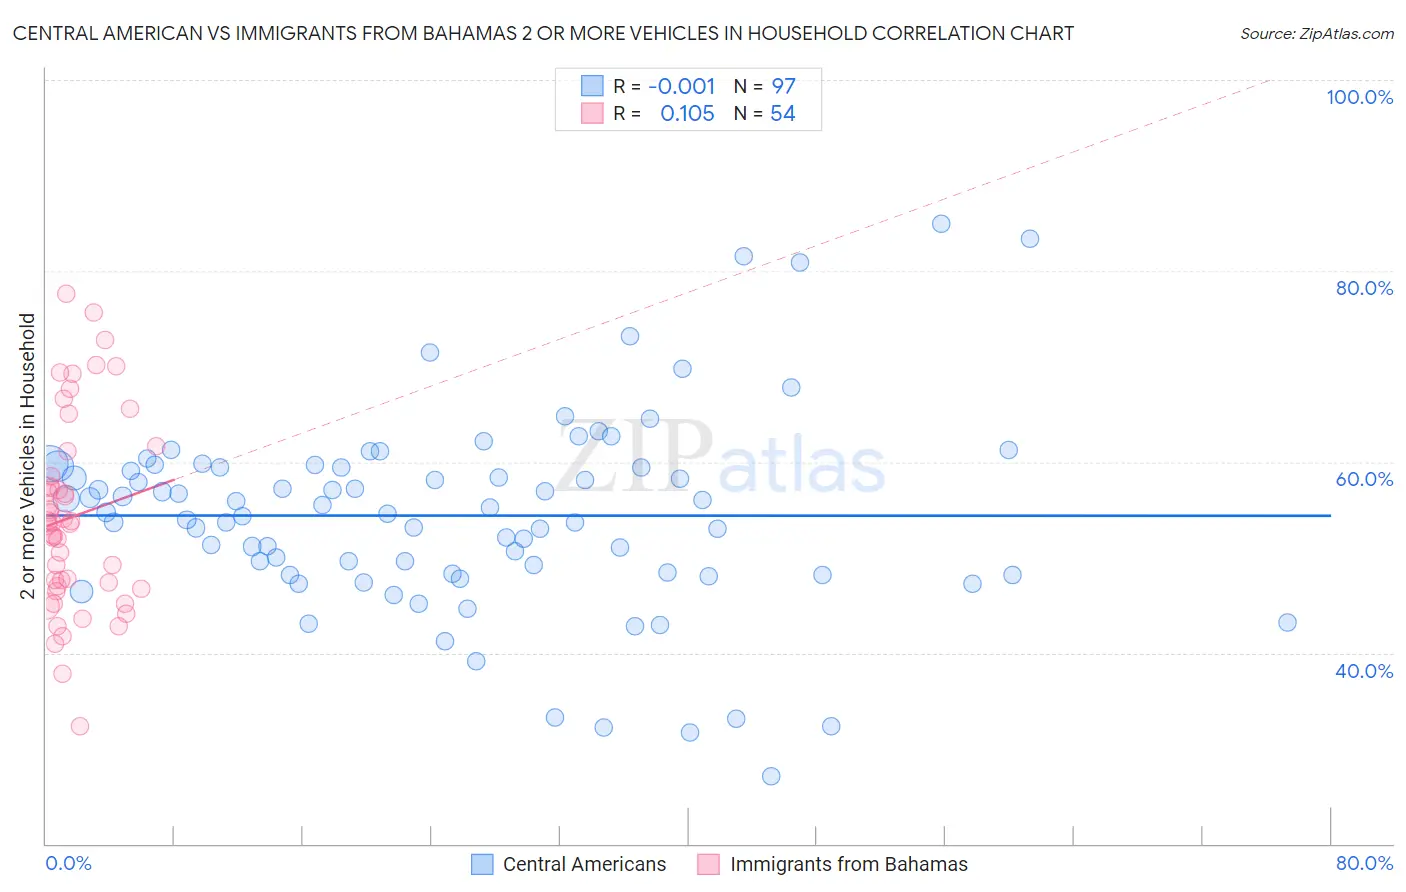 Central American vs Immigrants from Bahamas 2 or more Vehicles in Household